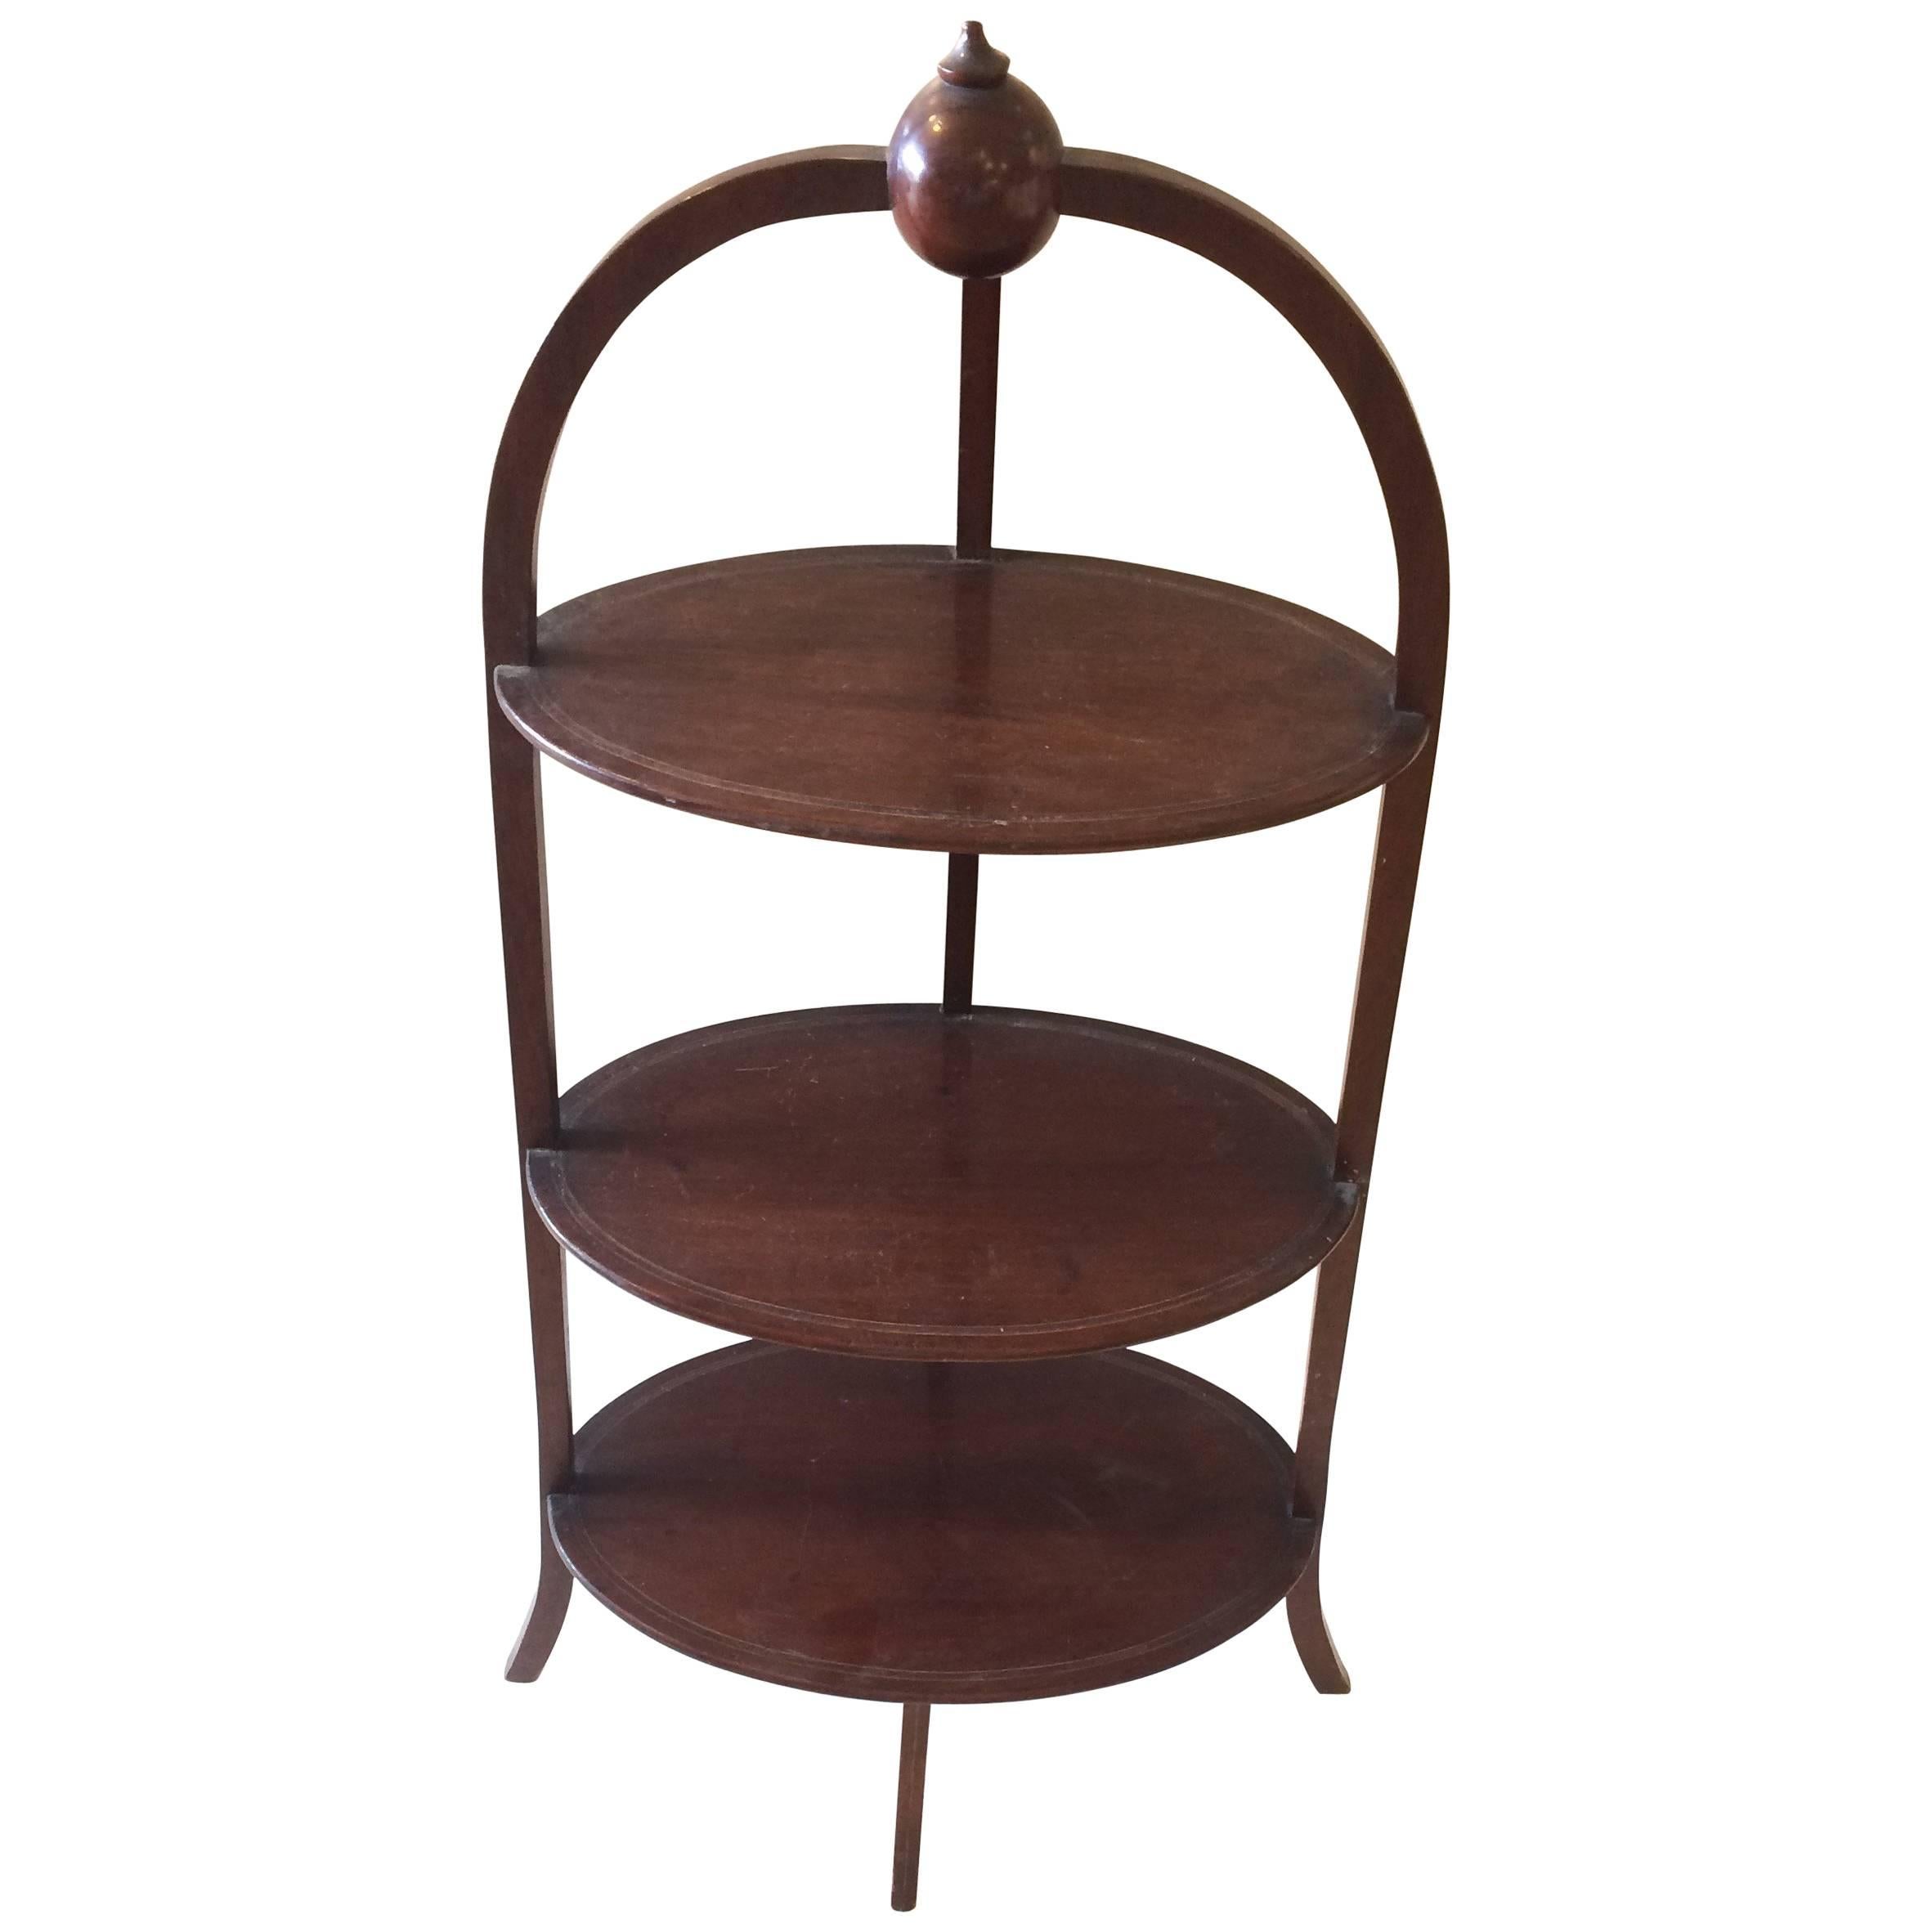 Rare 19th Century English Oval Three-Tier Side Table Muffin Stand For Sale